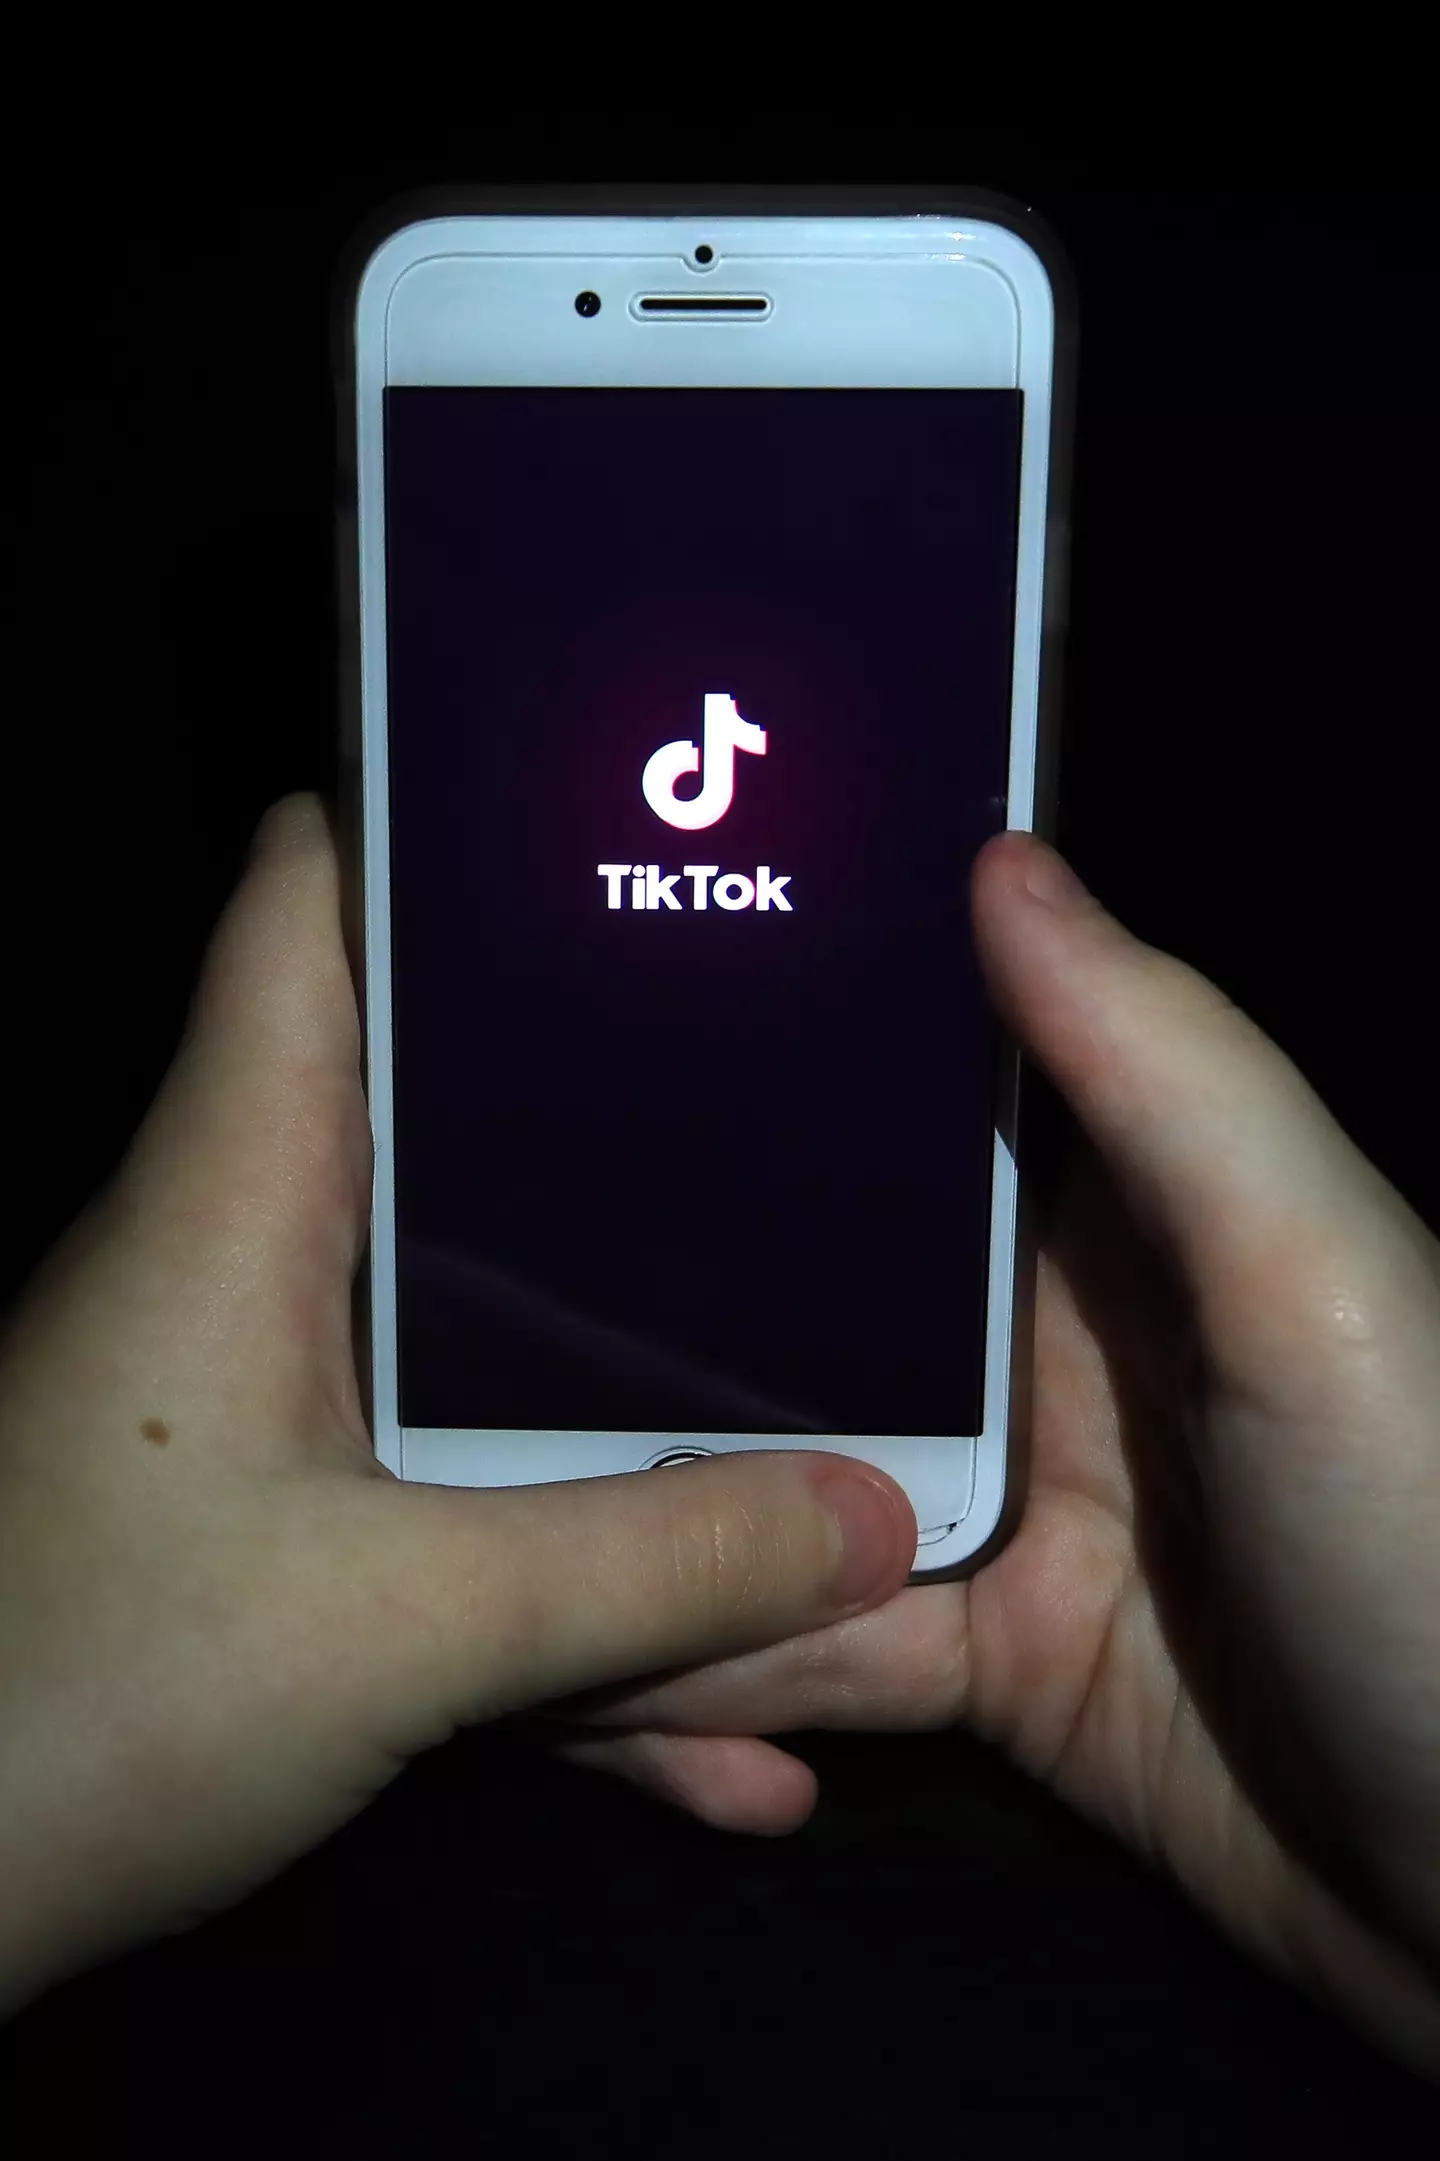 Both TikTok and Universal have lashed out at one another through open letters.